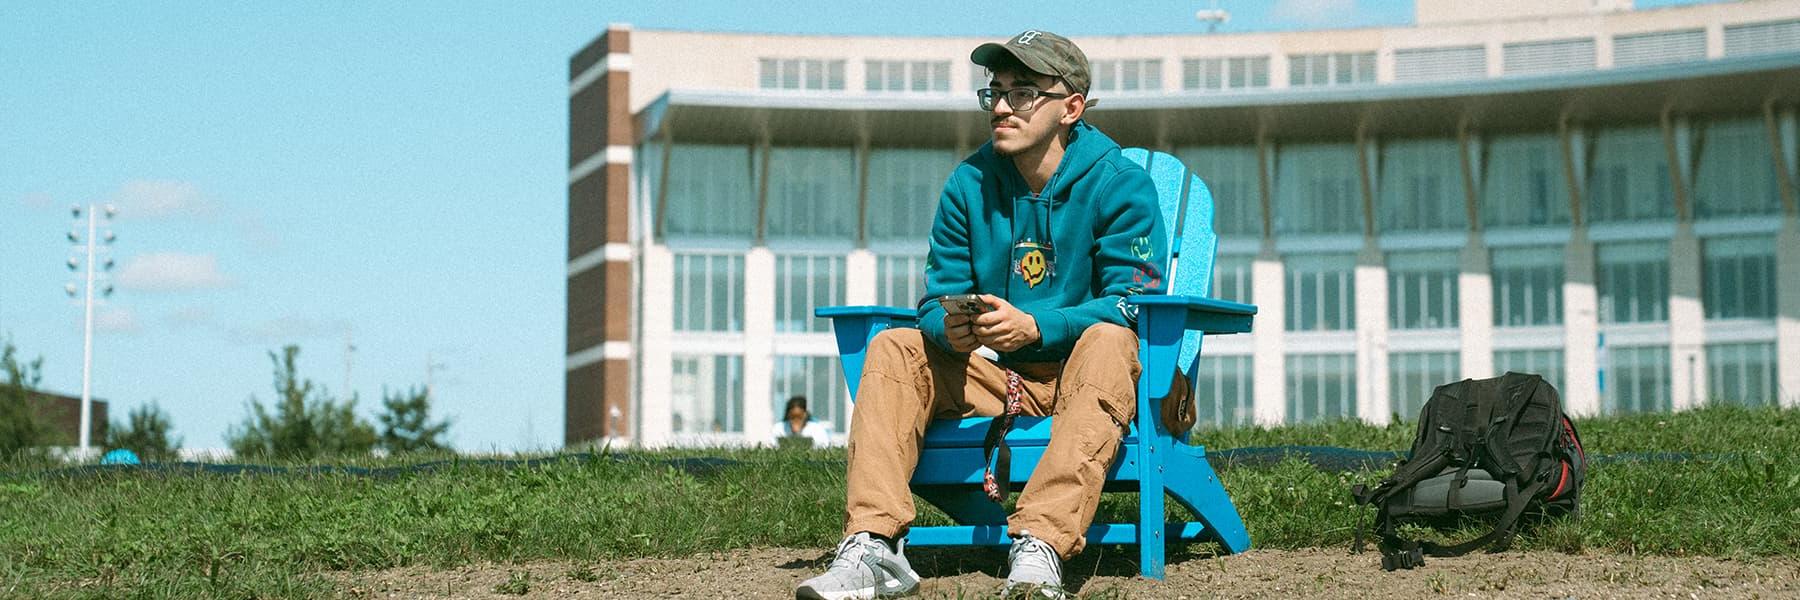 Student sits in blue chair on campus center lawn with cellphone in hand.